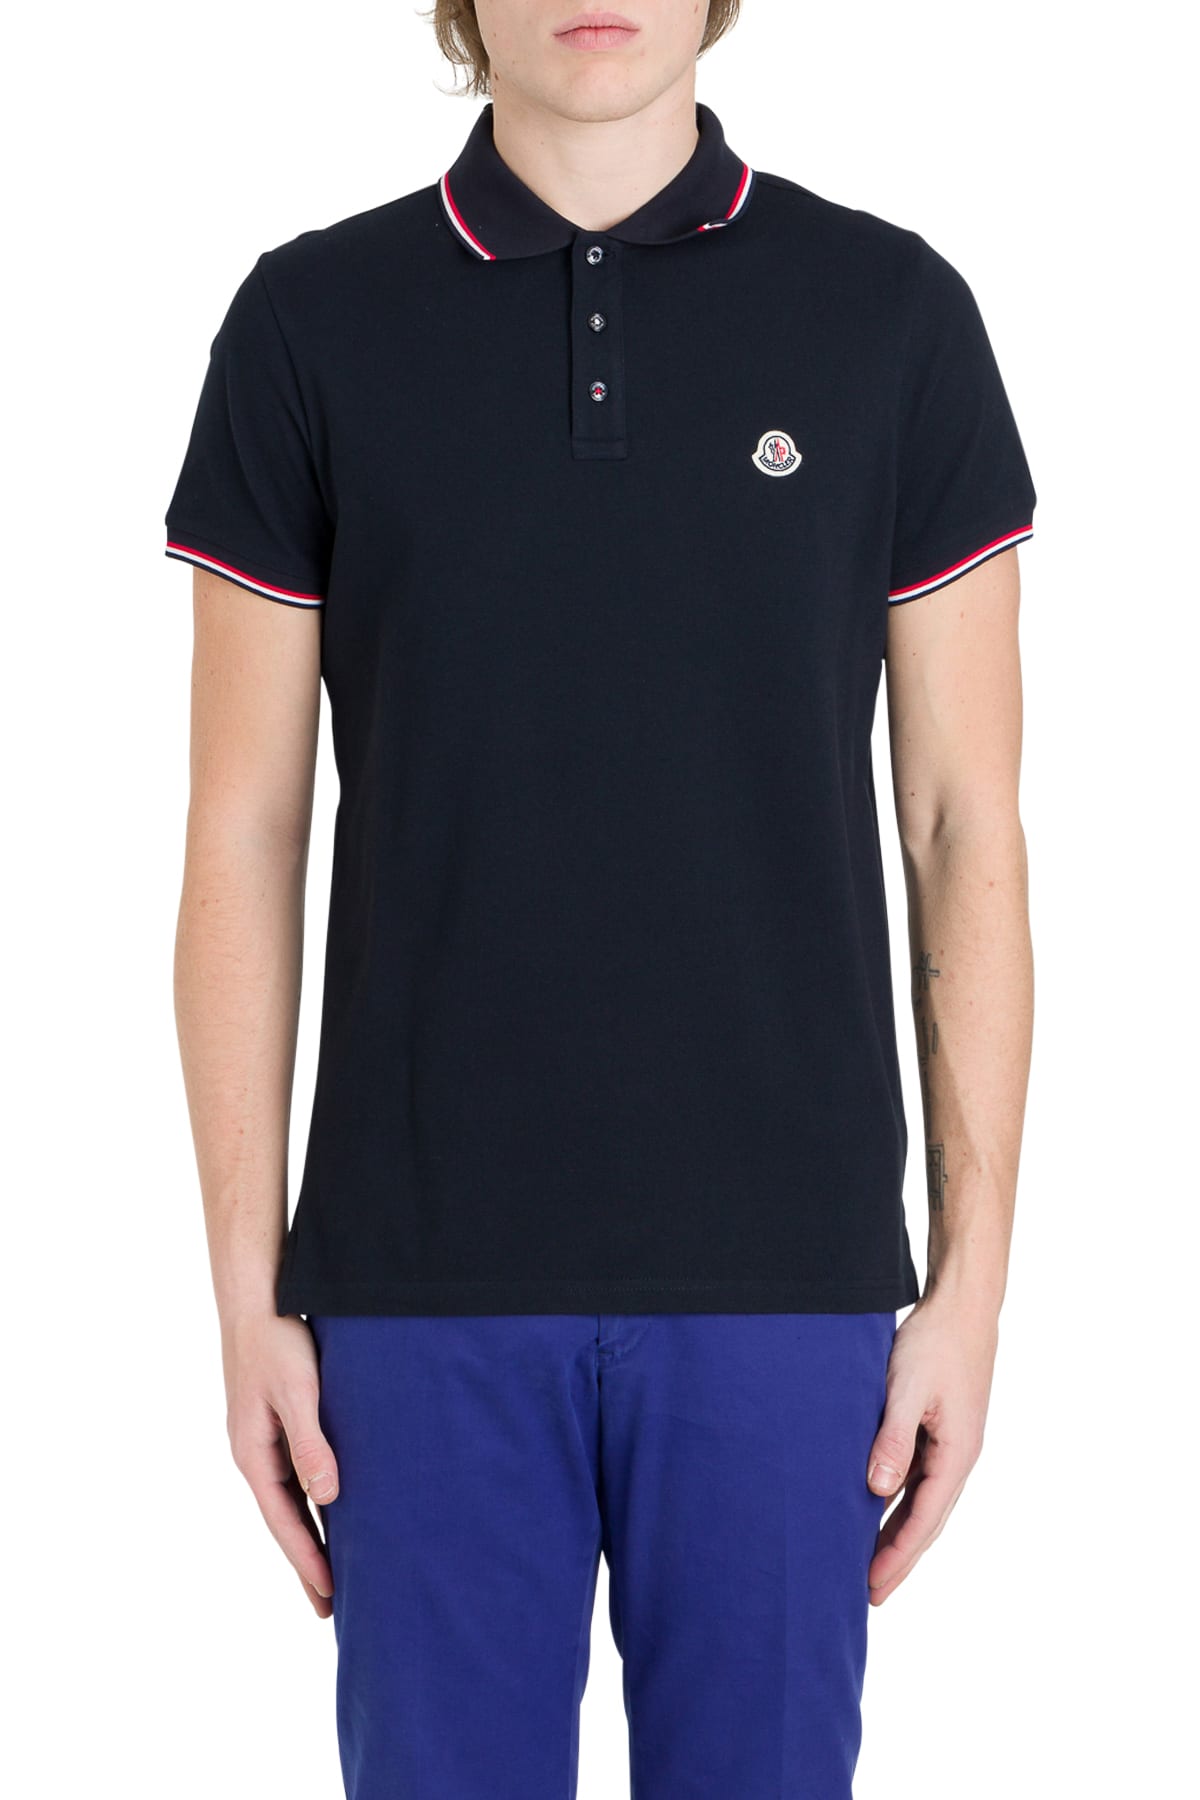 MONCLER POLO SHIRT WITH CONTRAST EDGE,11243903